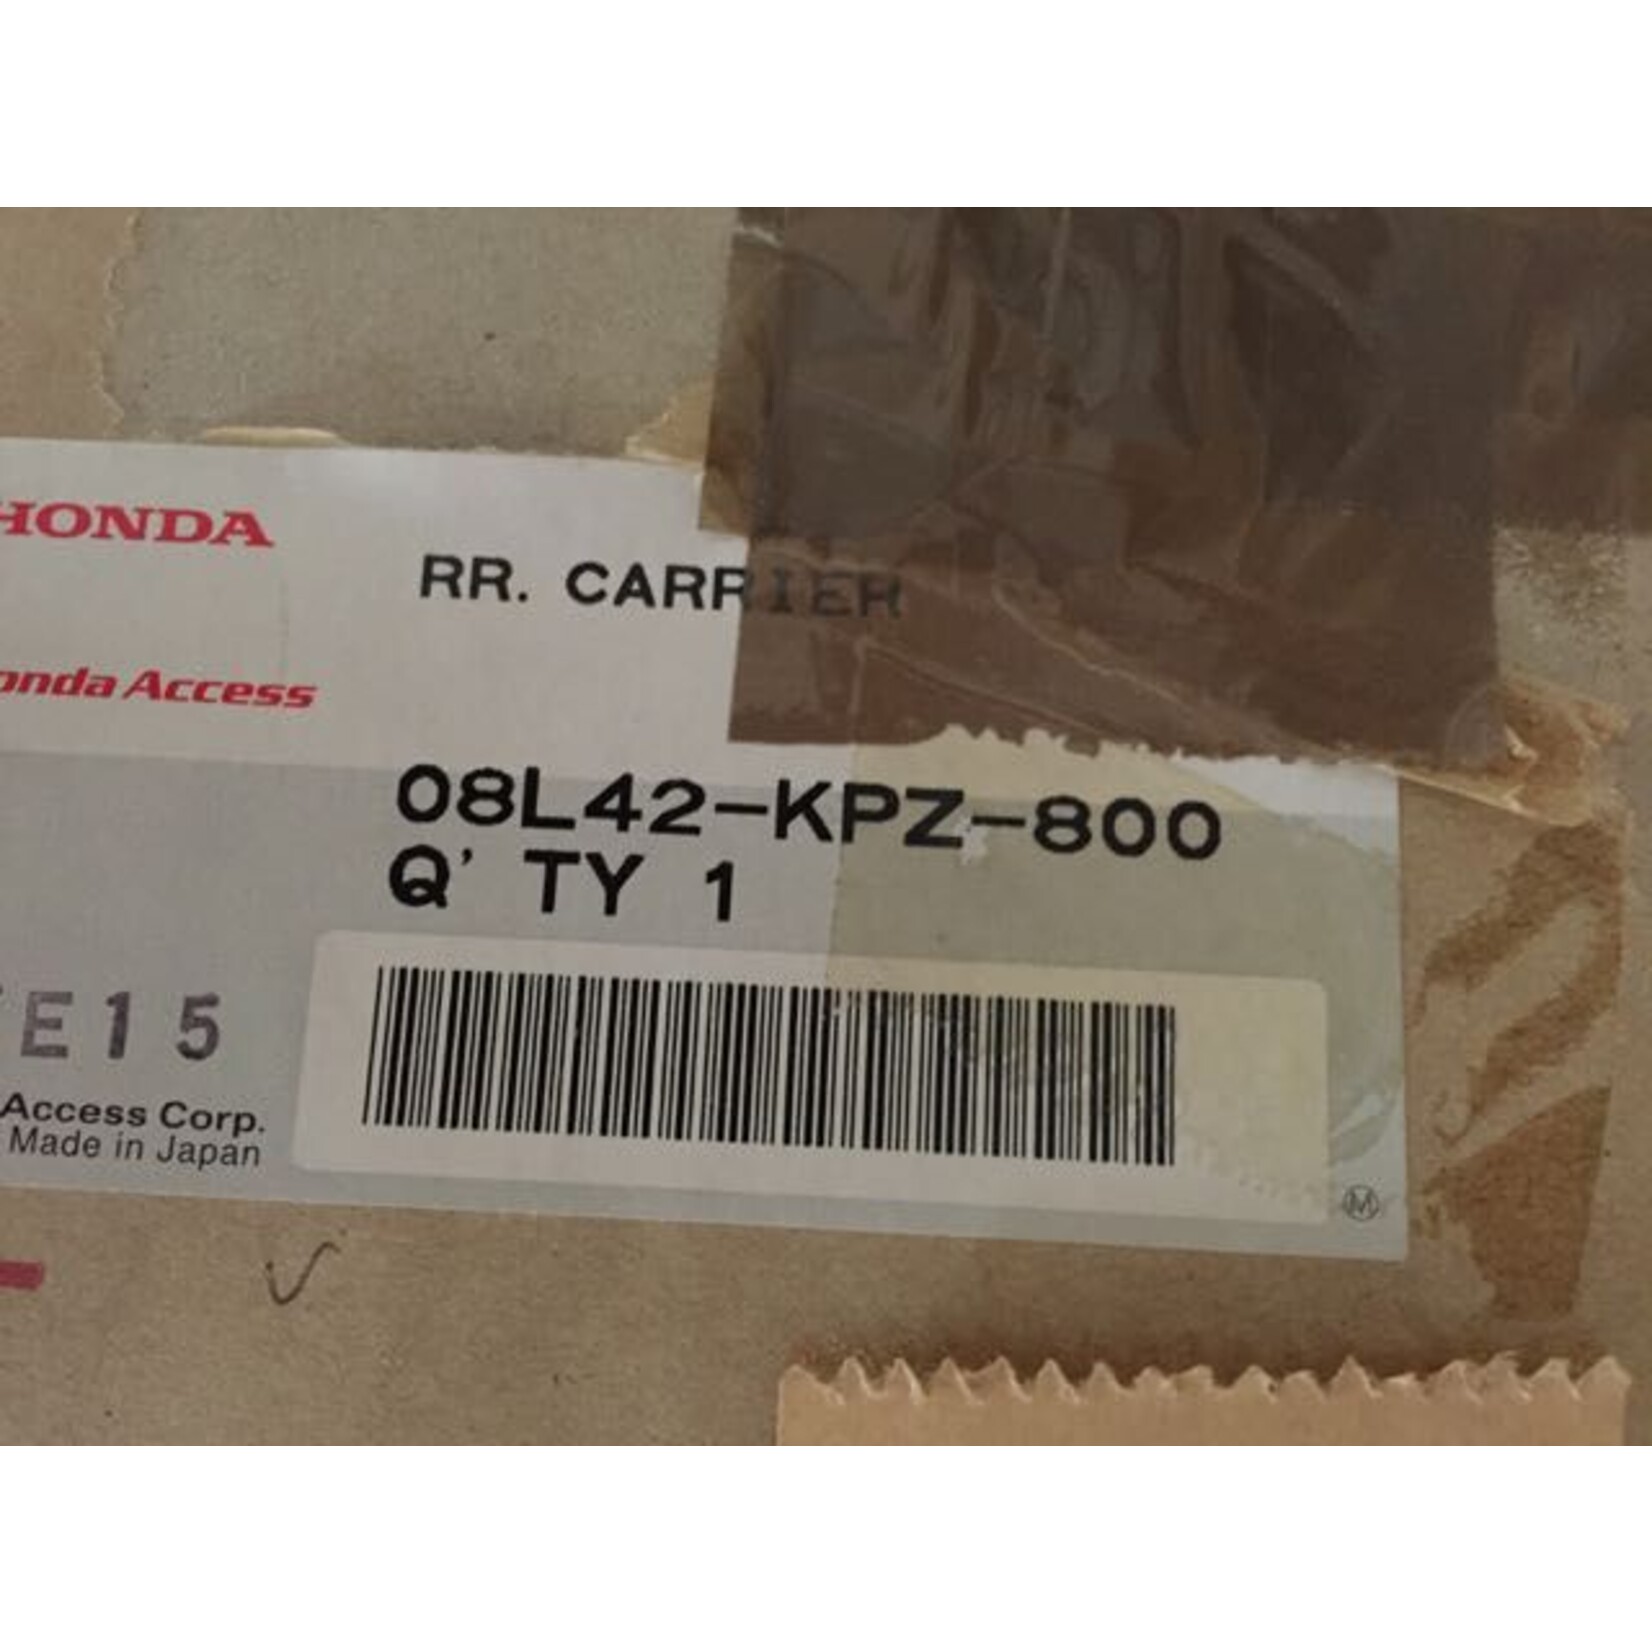 HONDA SES125 Dylan Top Box with Carrier